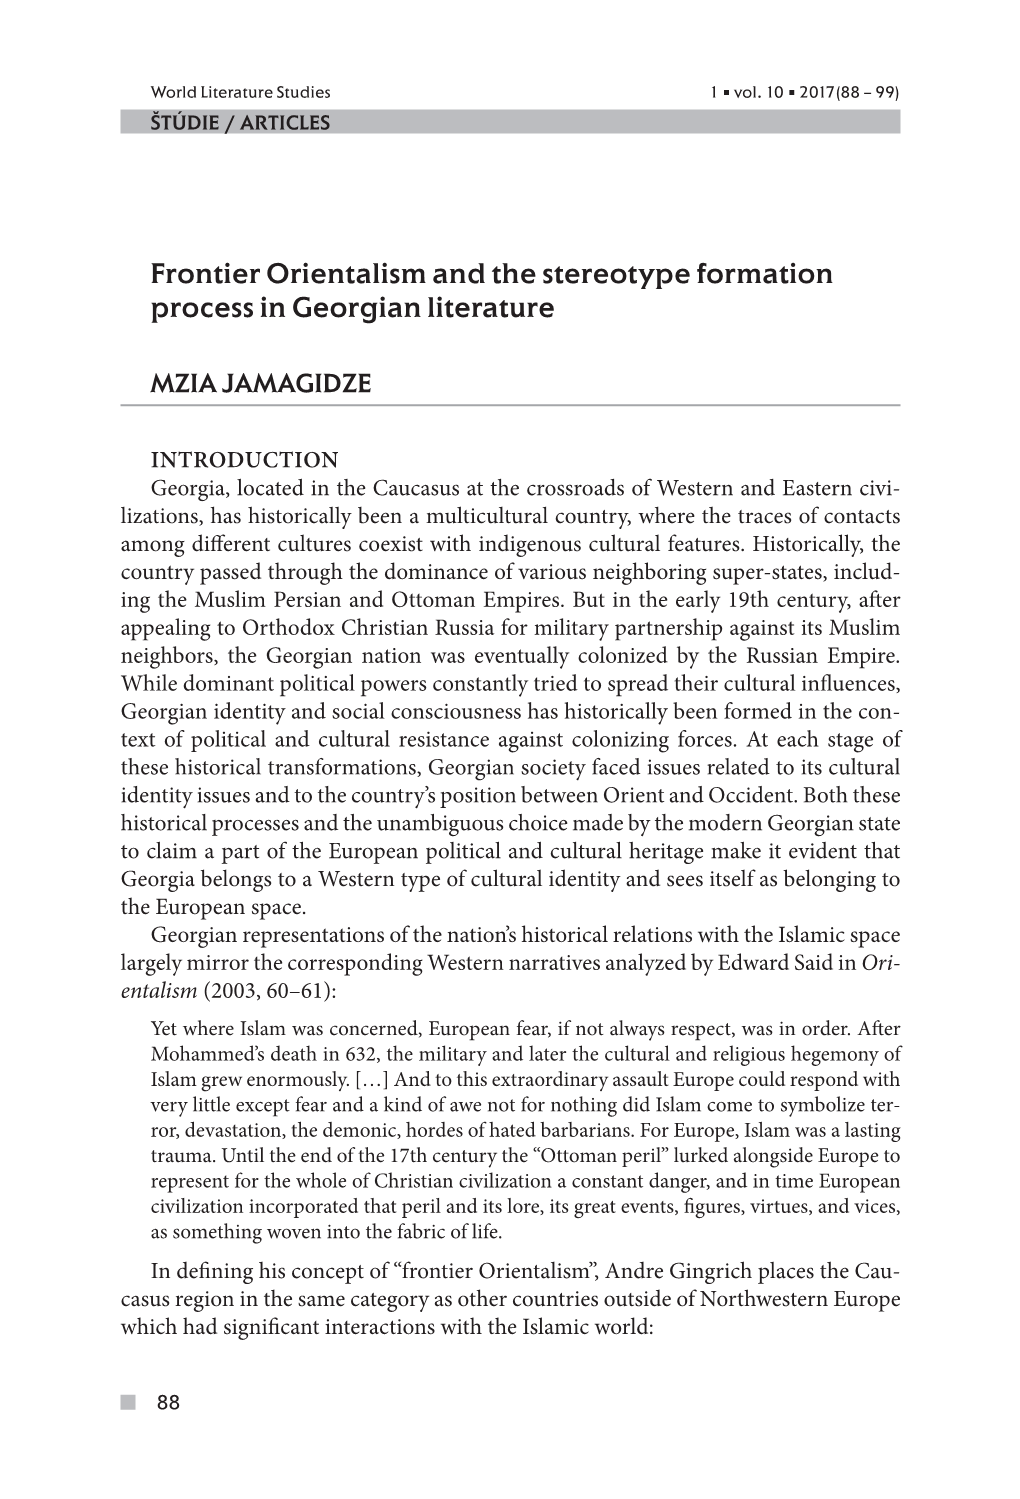 Frontier Orientalism and the Stereotype Formation Process in Georgian Literature